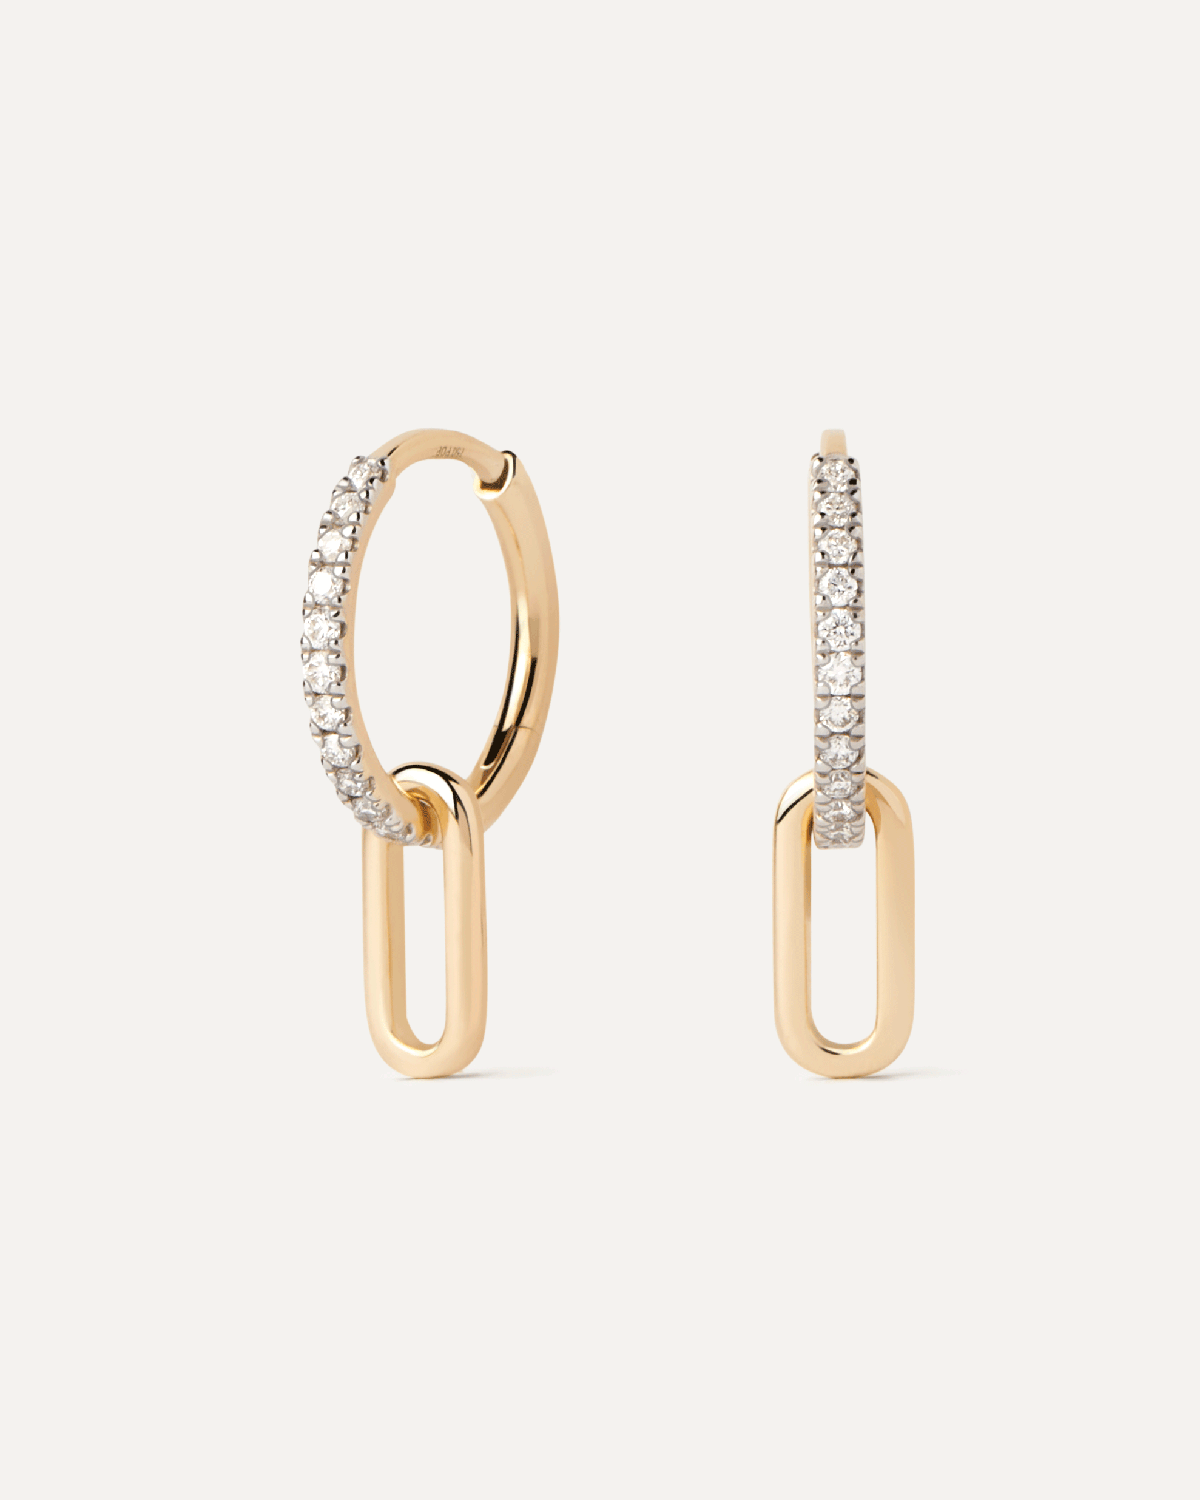 Diamonds and gold Tay hoops. Half-eternity hoop earrings in solid yellow gold and lab-grown diamonds with an oval pendant. Get the latest arrival from PDPAOLA. Place your order safely and get this Best Seller.